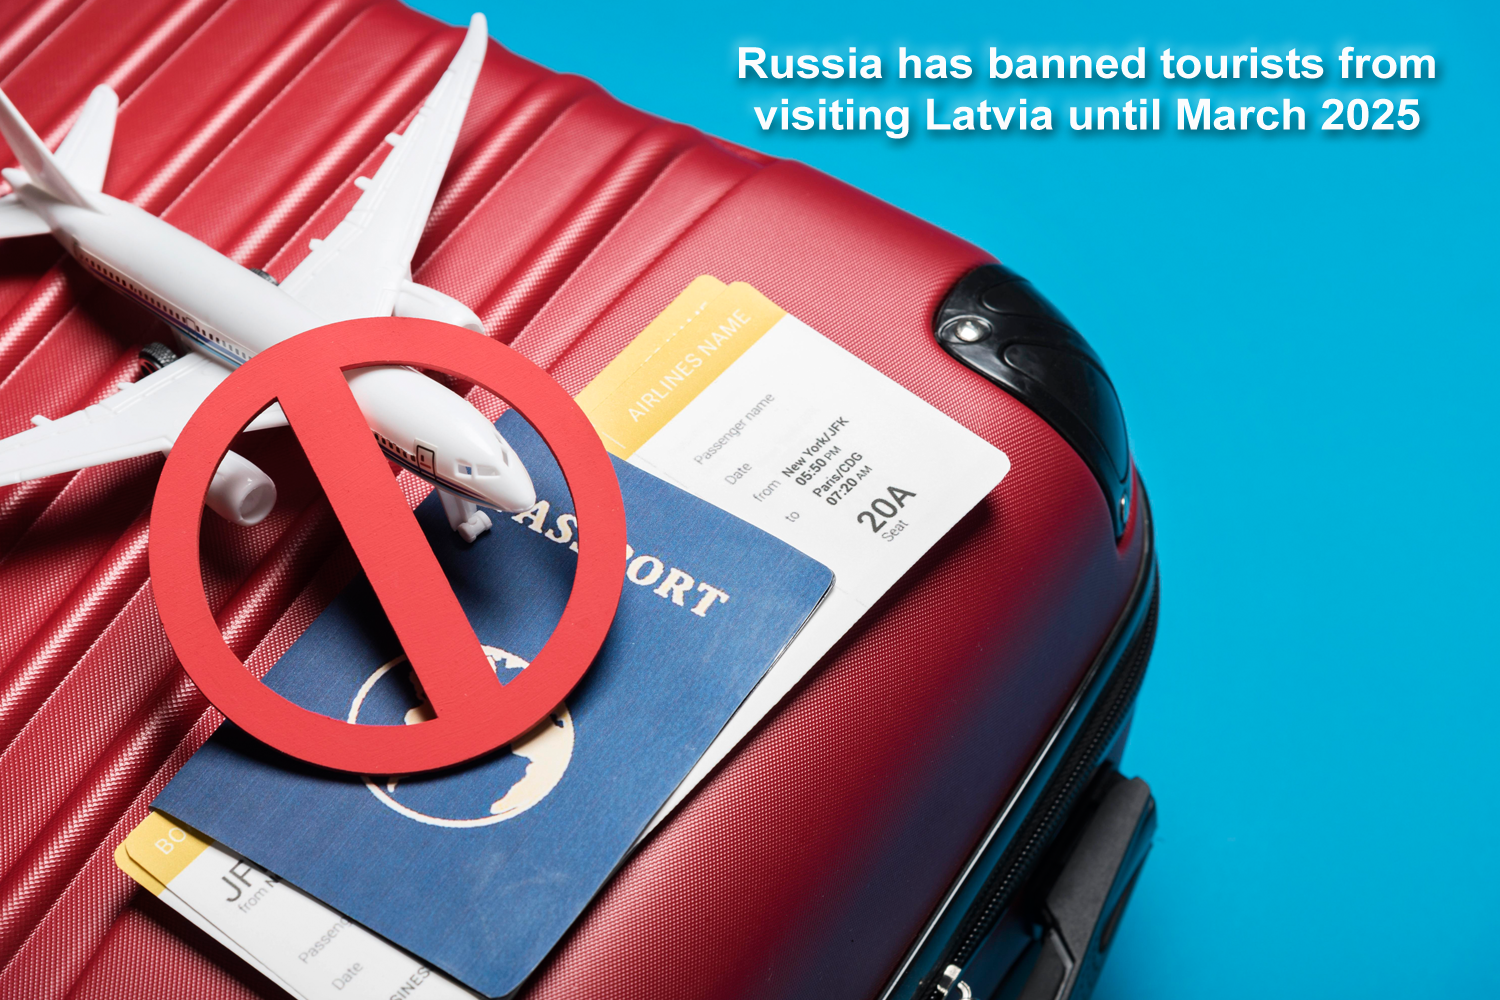 Russia has banned tourists from visiting Latvia until March 2025.